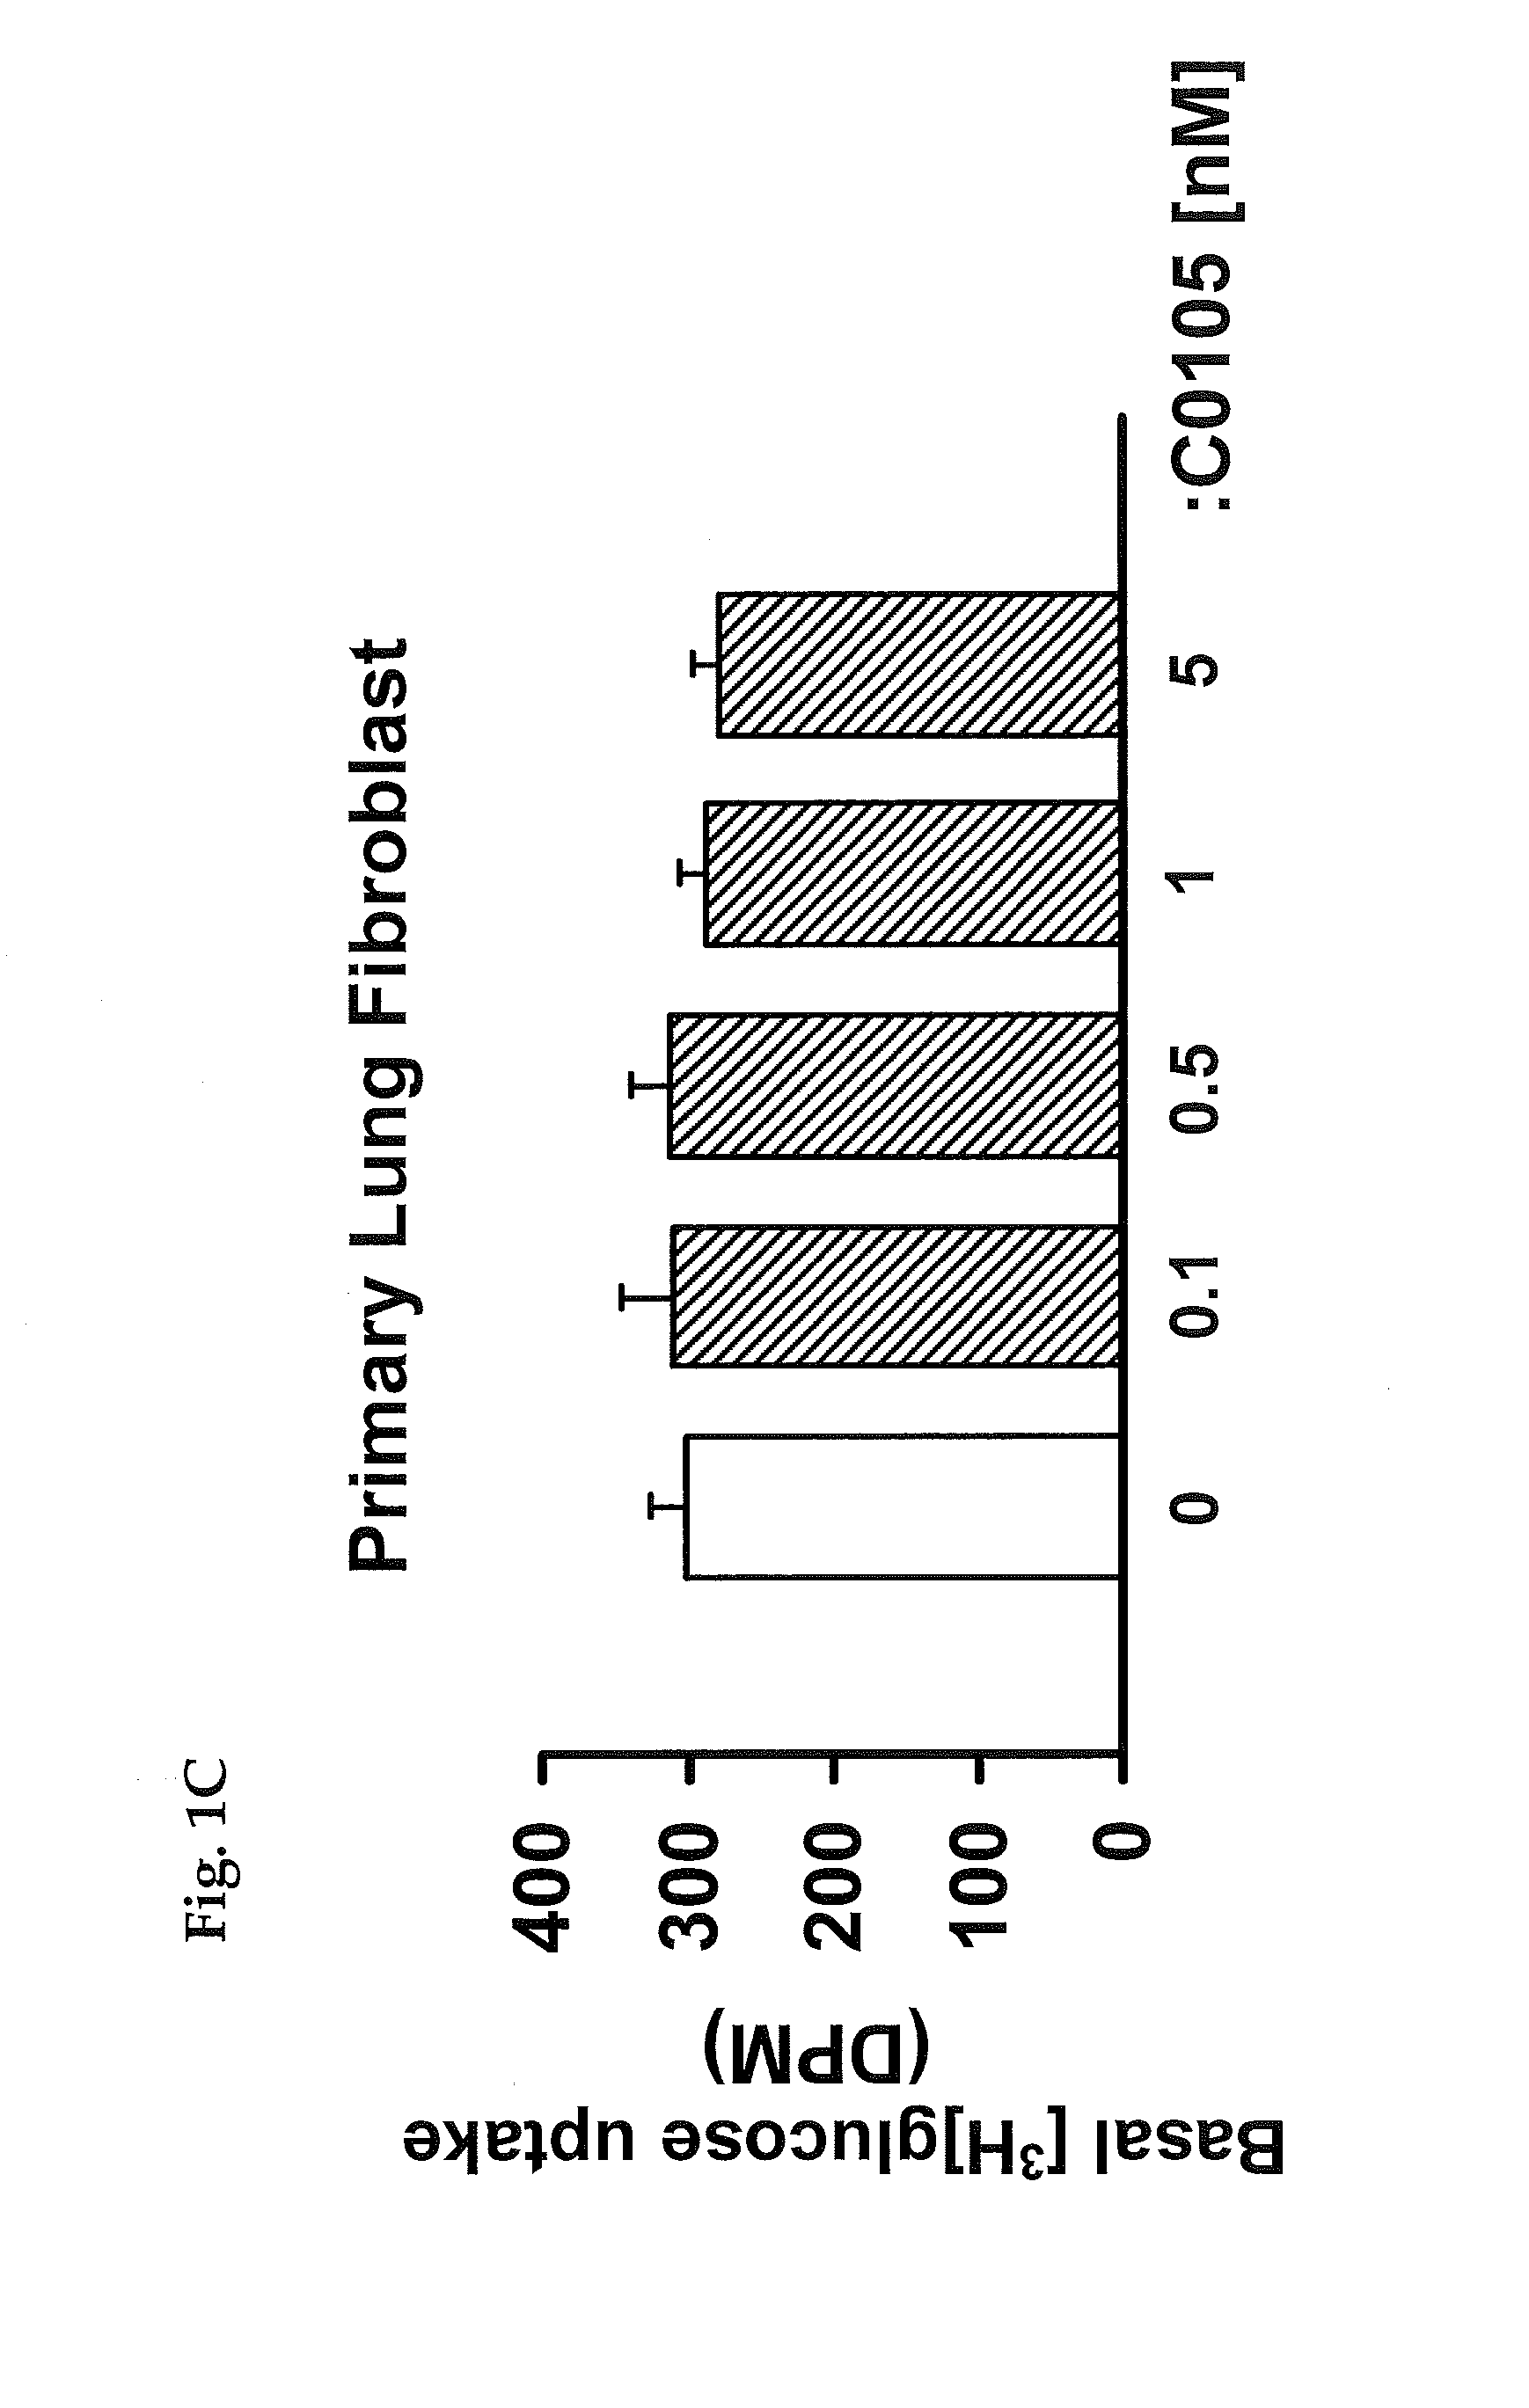 Method for inhibiting growth of cancer cells